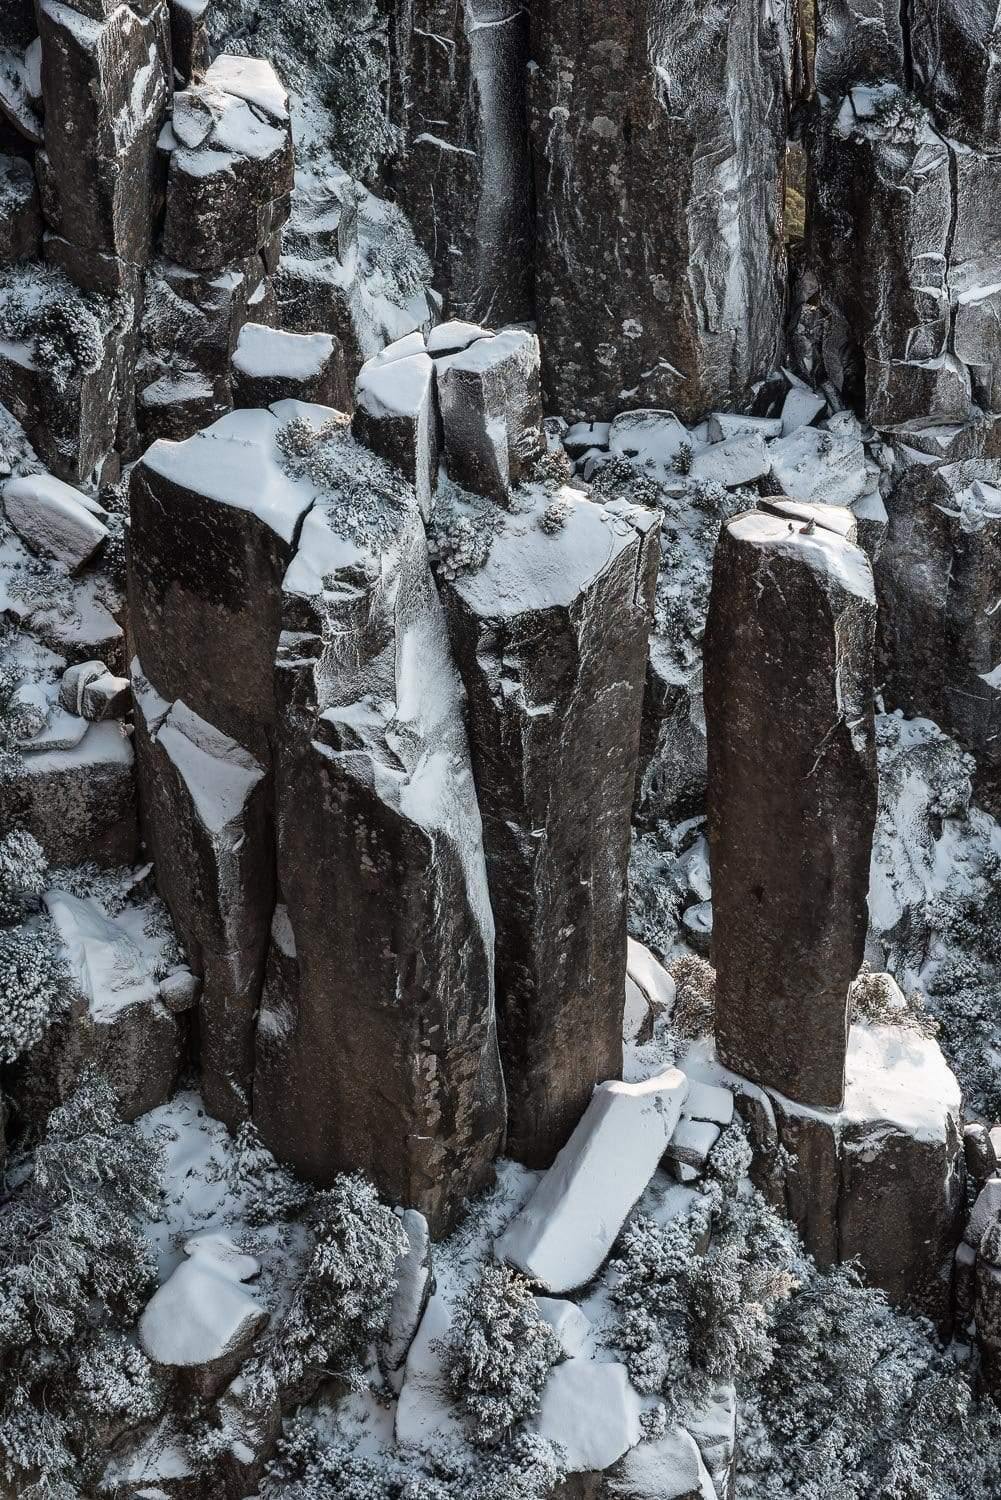 An undefined shape of standing pieces of giant stones penetrated in the ground, Amphitheatre Snowfall - MT Wellington